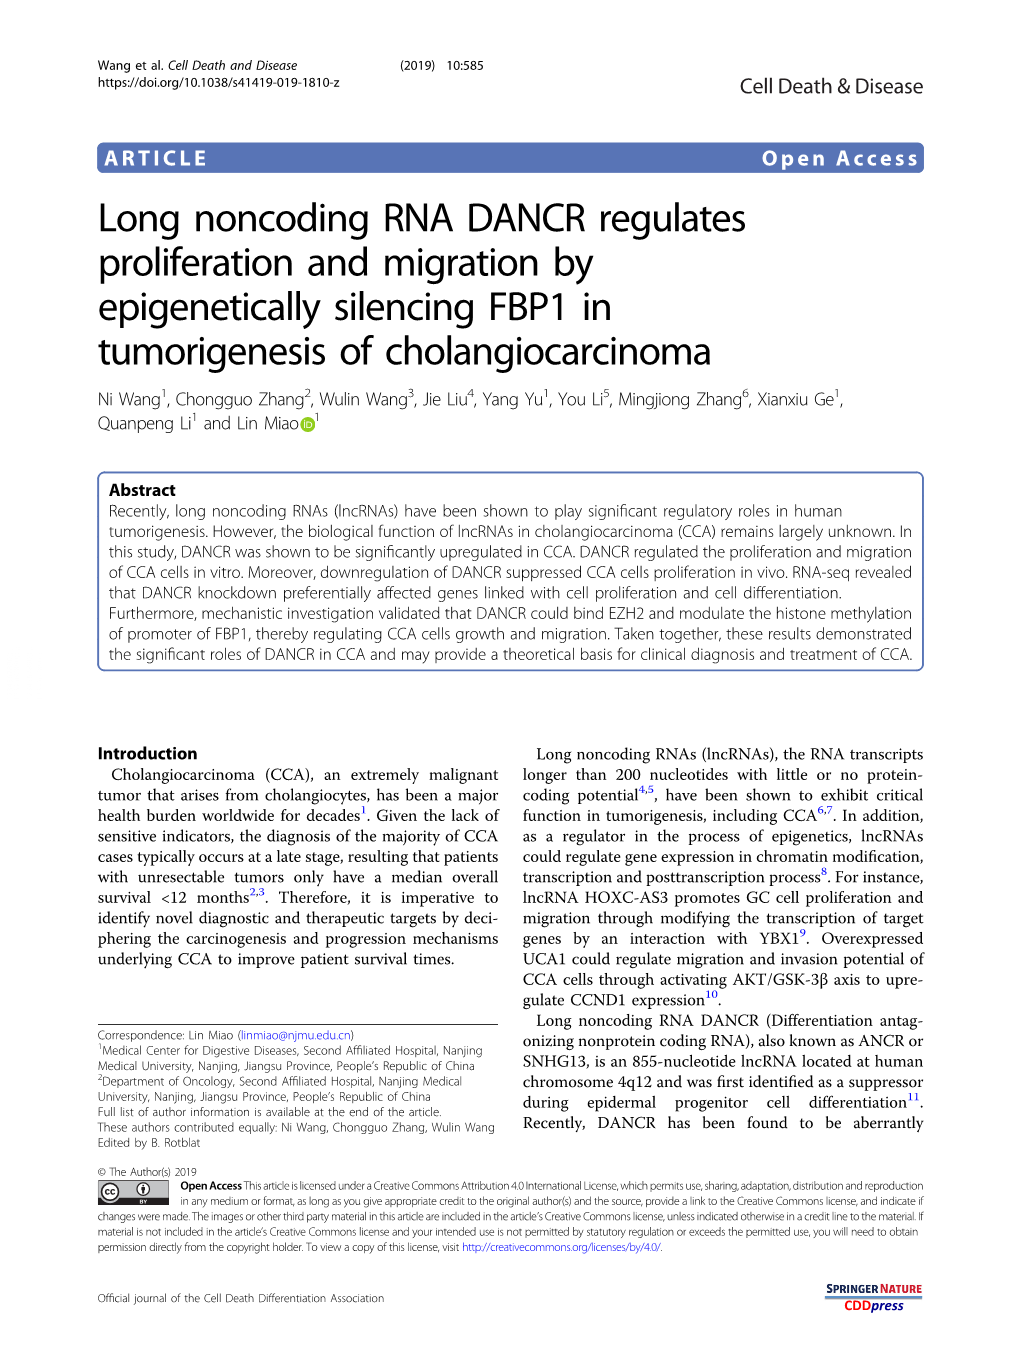 Long Noncoding RNA DANCR Regulates Proliferation and Migration by Epigenetically Silencing FBP1 in Tumorigenesis of Cholangiocar